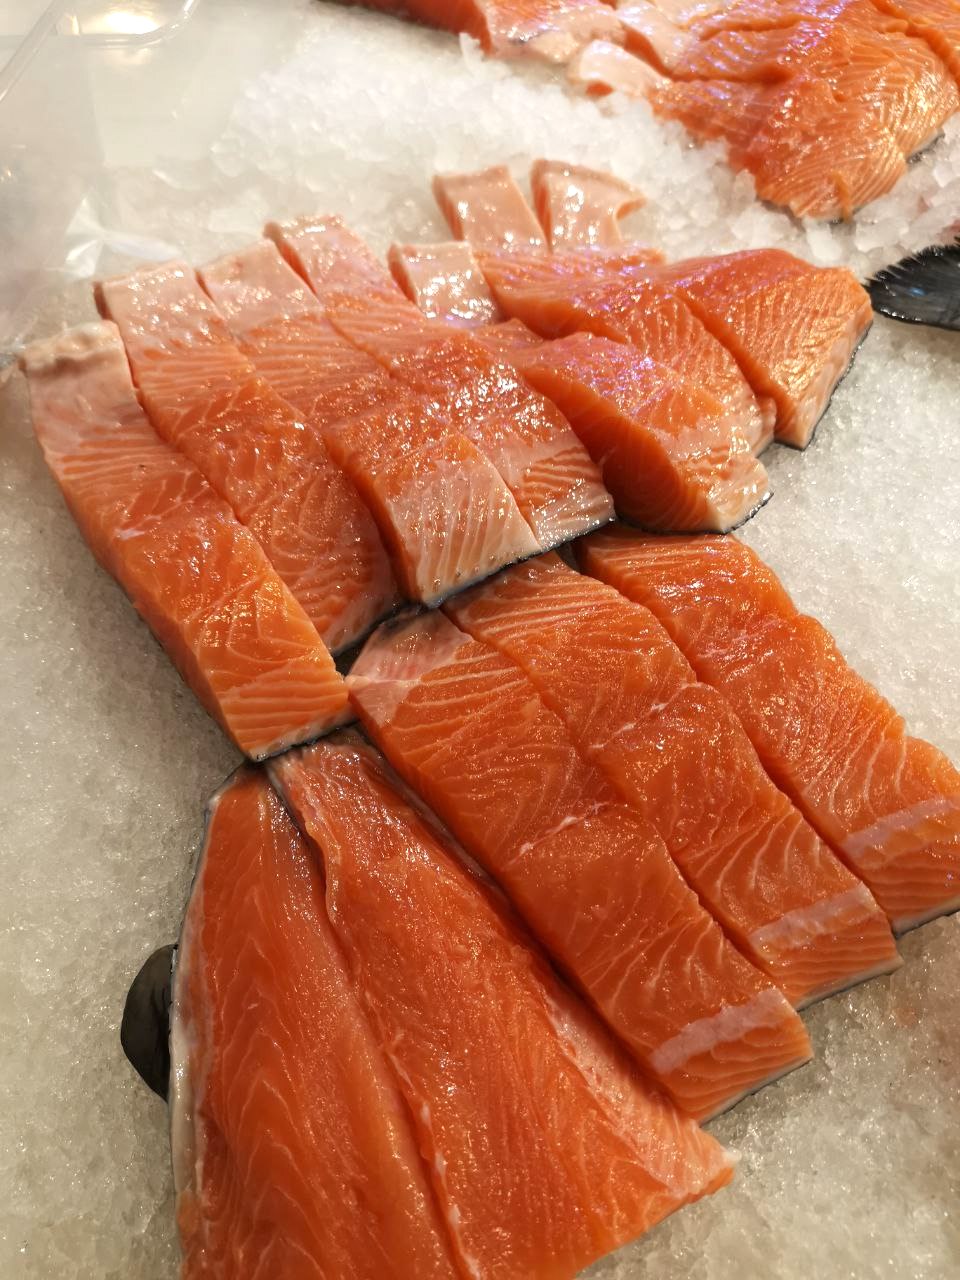 Cuts of Fresh Salmon Fillets that are sustainably sourced